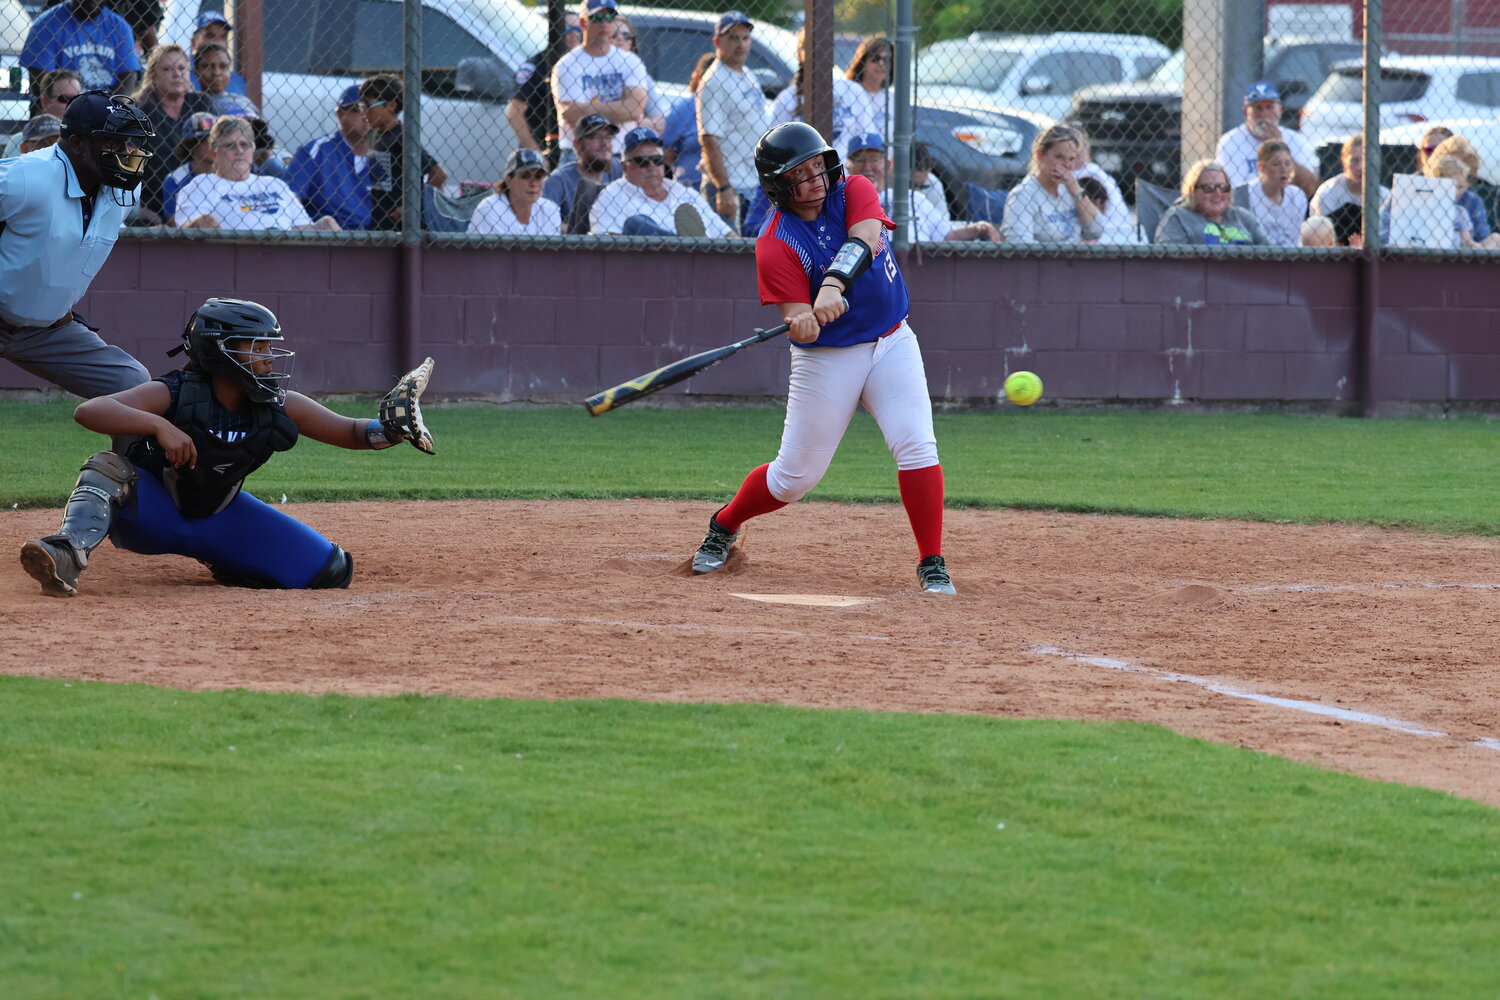 Lady Mustangs Kaelynn Mendiola (13) swings at a pitch in the bi-district match against Yoakum.